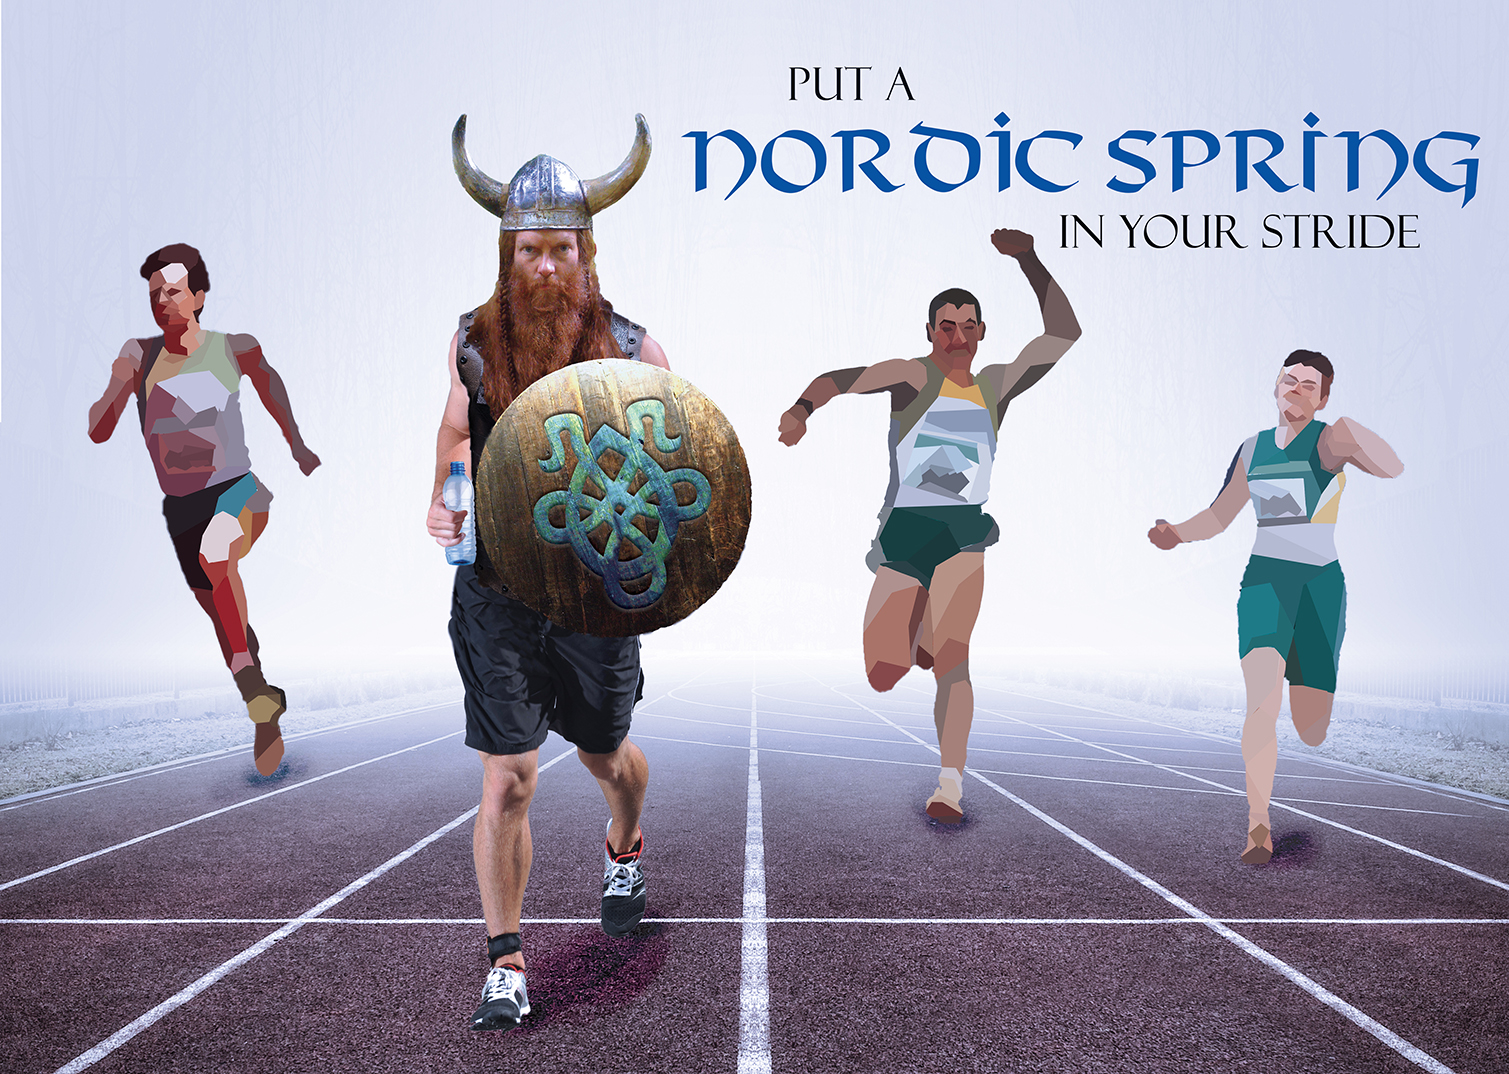 A poster for a water brand showing a track running race where the lead runner is wearing a horned viking helmet, full braided beard and carrying a wooden shield.